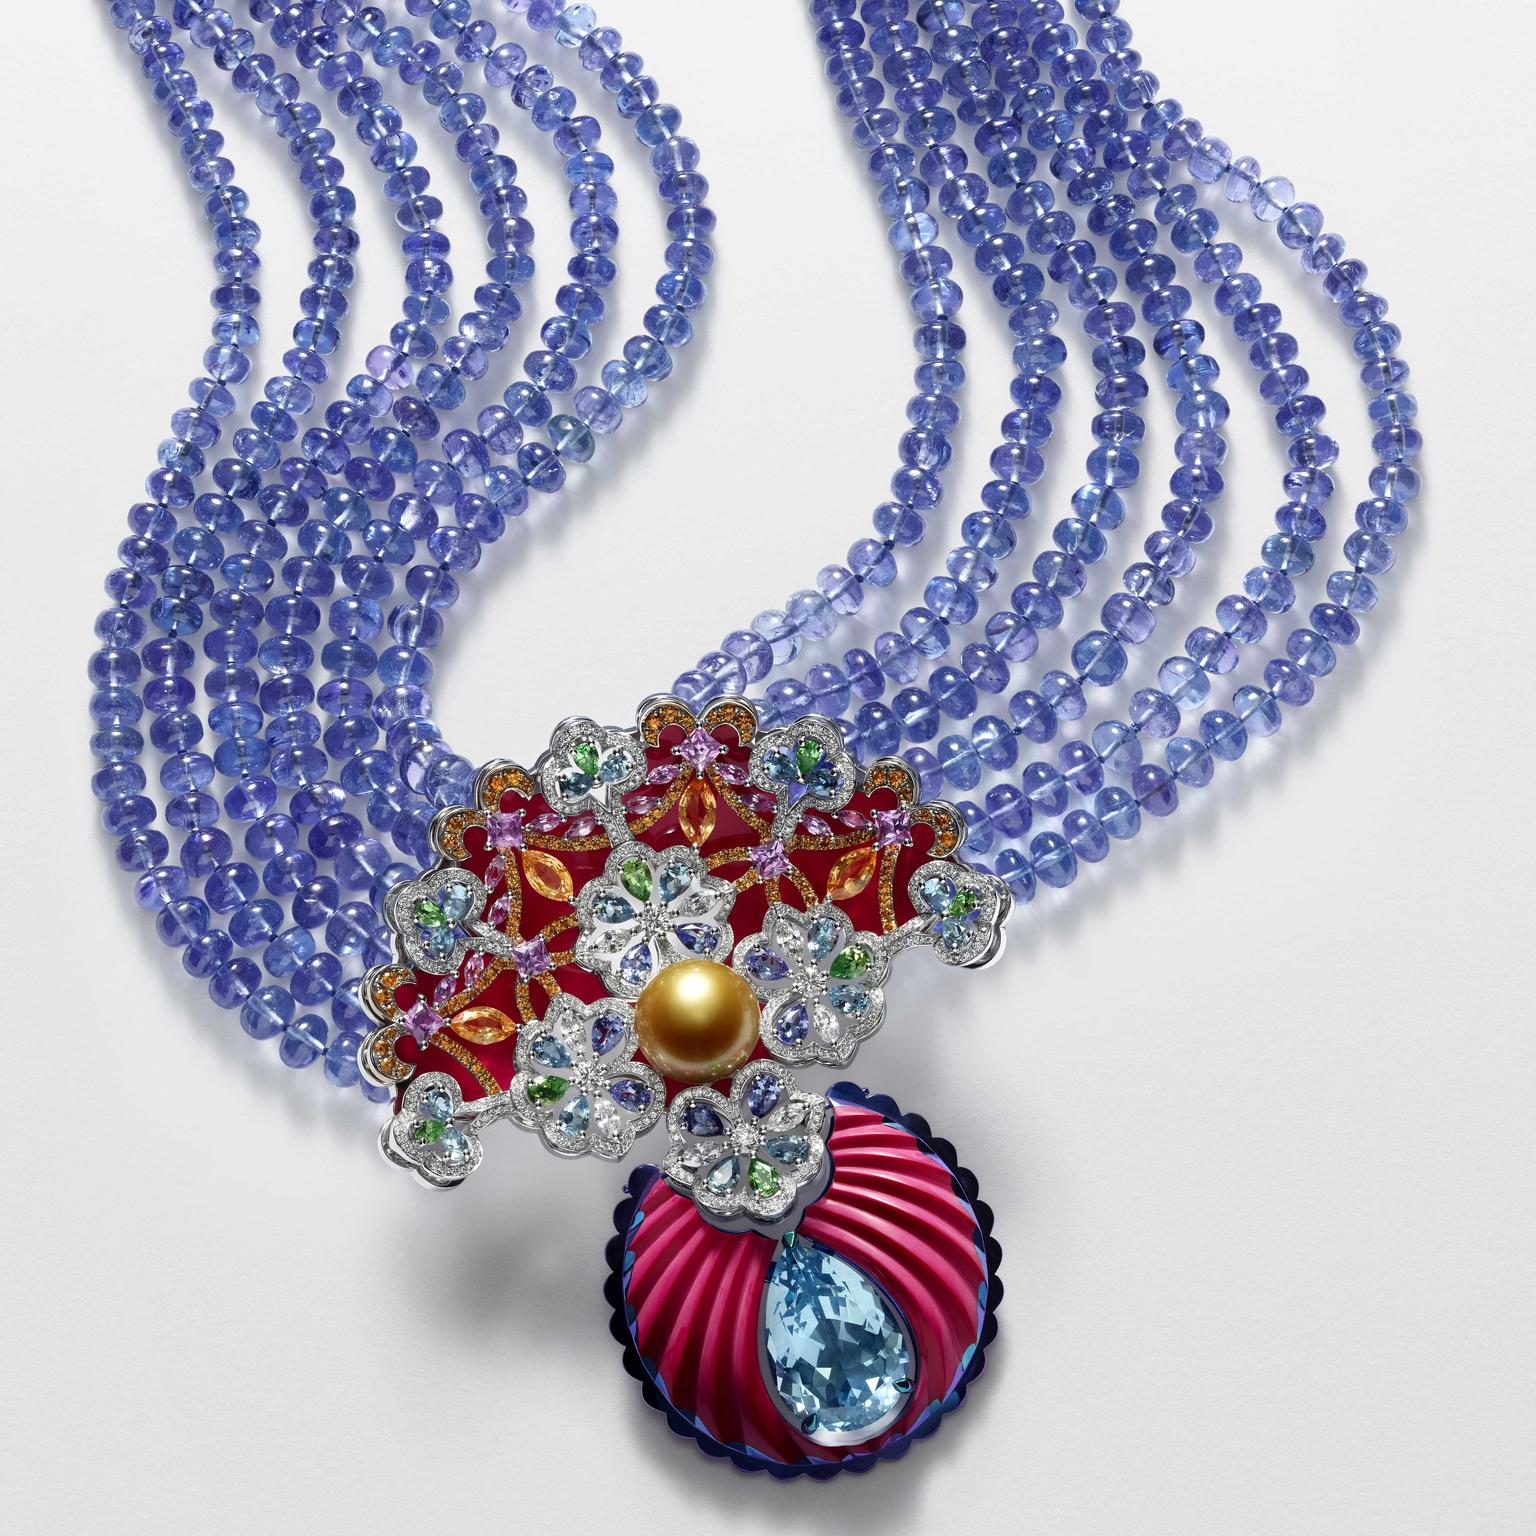 Chopard tanzanite and aquamarine necklace from Red Carpet